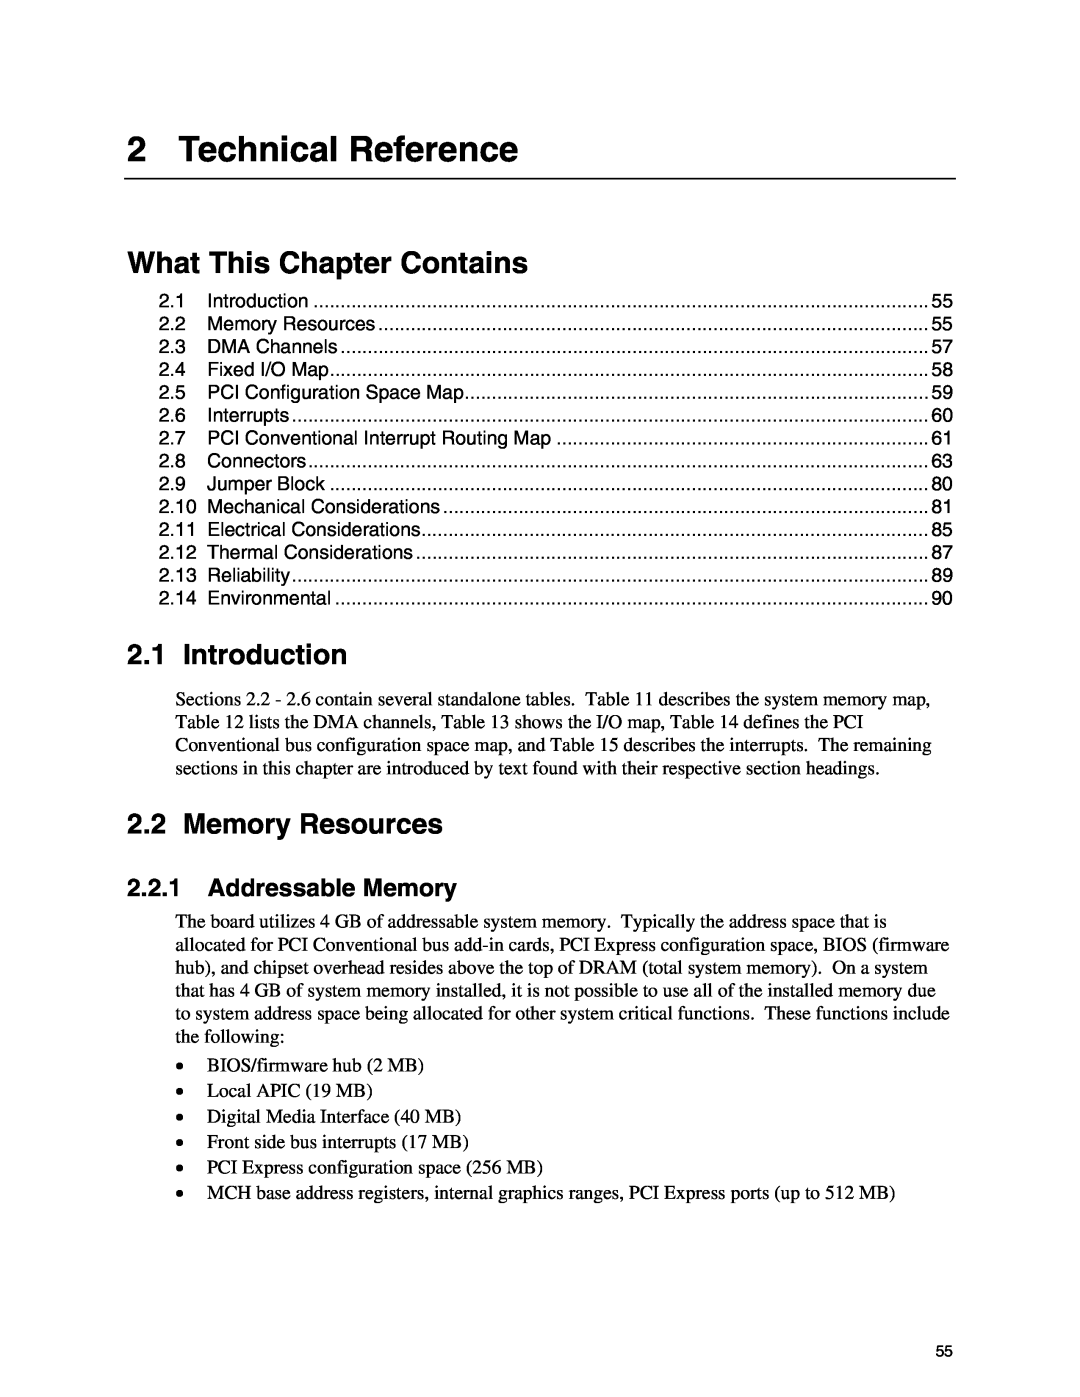 Intel D925XBC, D925XCV Technical Reference, Introduction, Memory Resources, Addressable Memory, What This Chapter Contains 